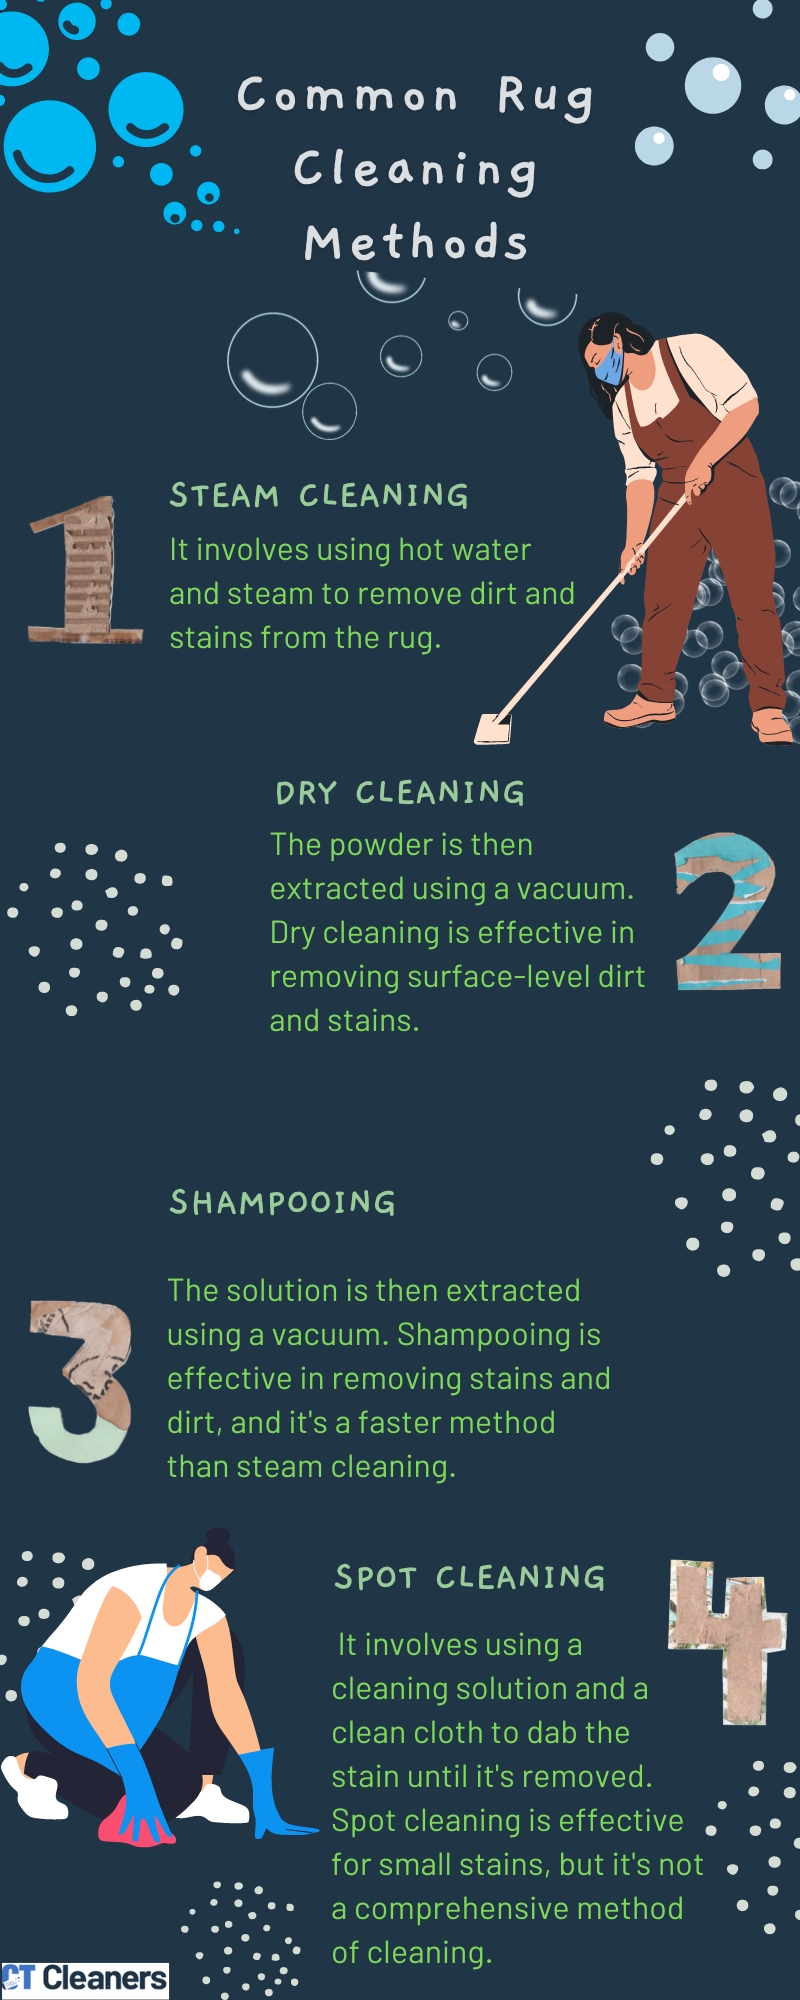 Common Rug Cleaning Methods